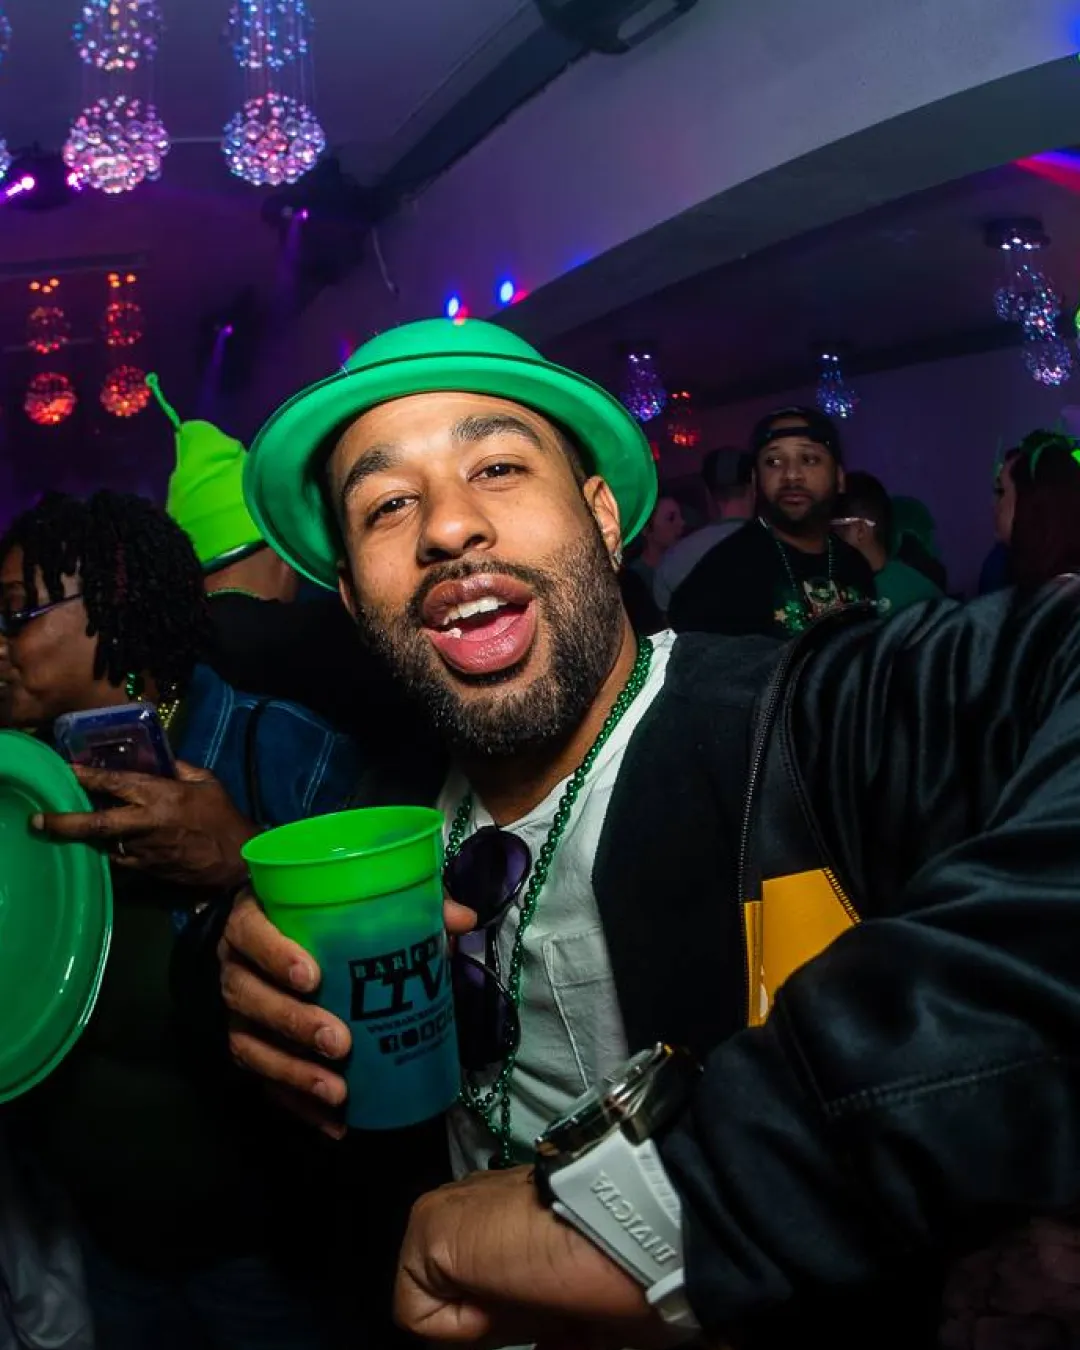 Gentleman dressed in a classic st pats bucket hat lost in the rhythm and lights of the city's most happening nightclub during the bar crawl
